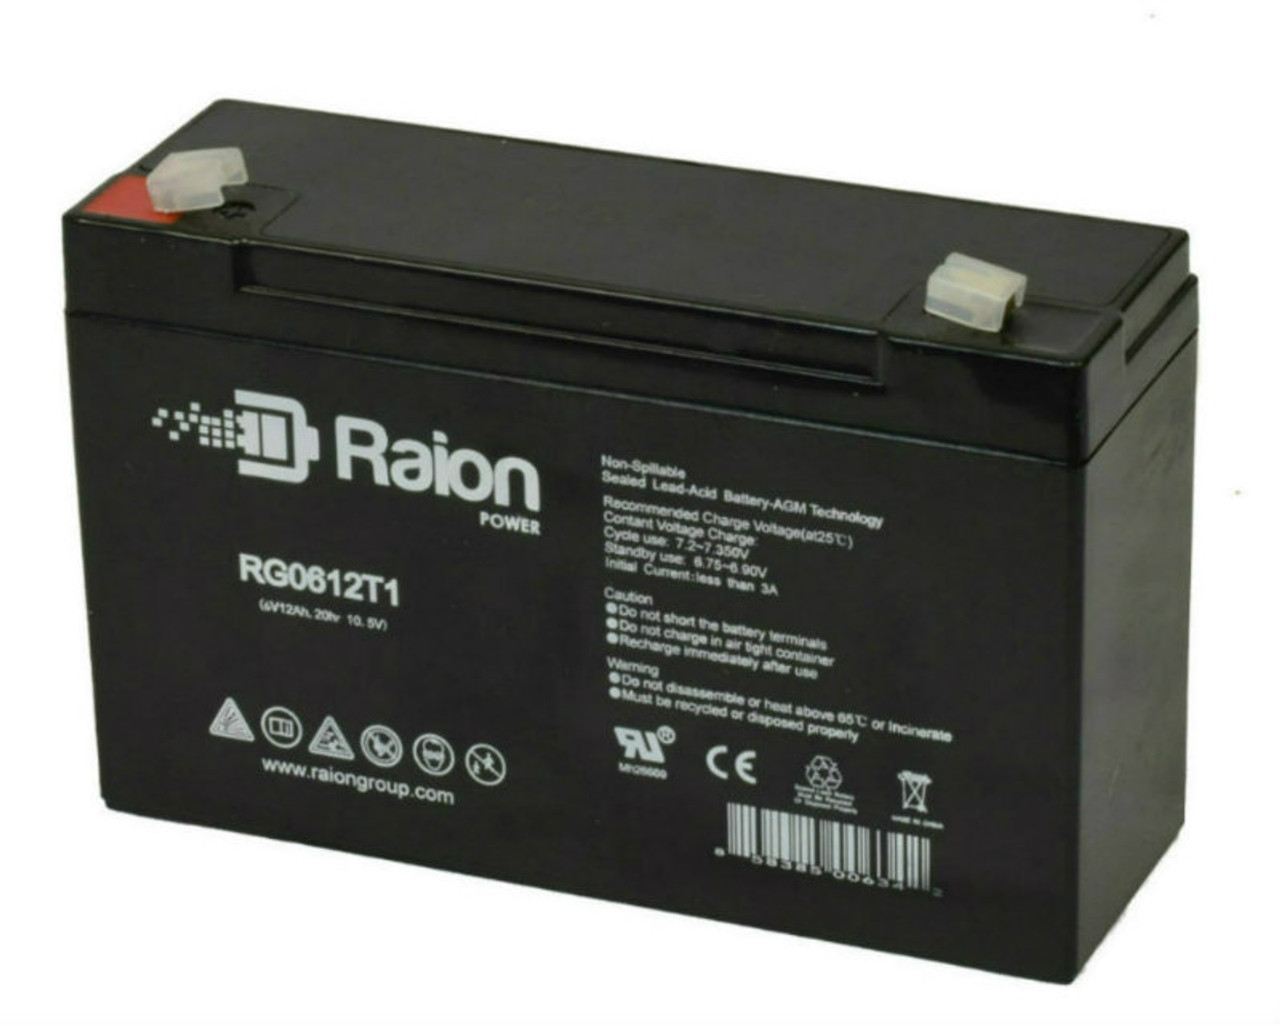 Raion Power RG06120T1 Replacement Battery for Yucel Y12-6